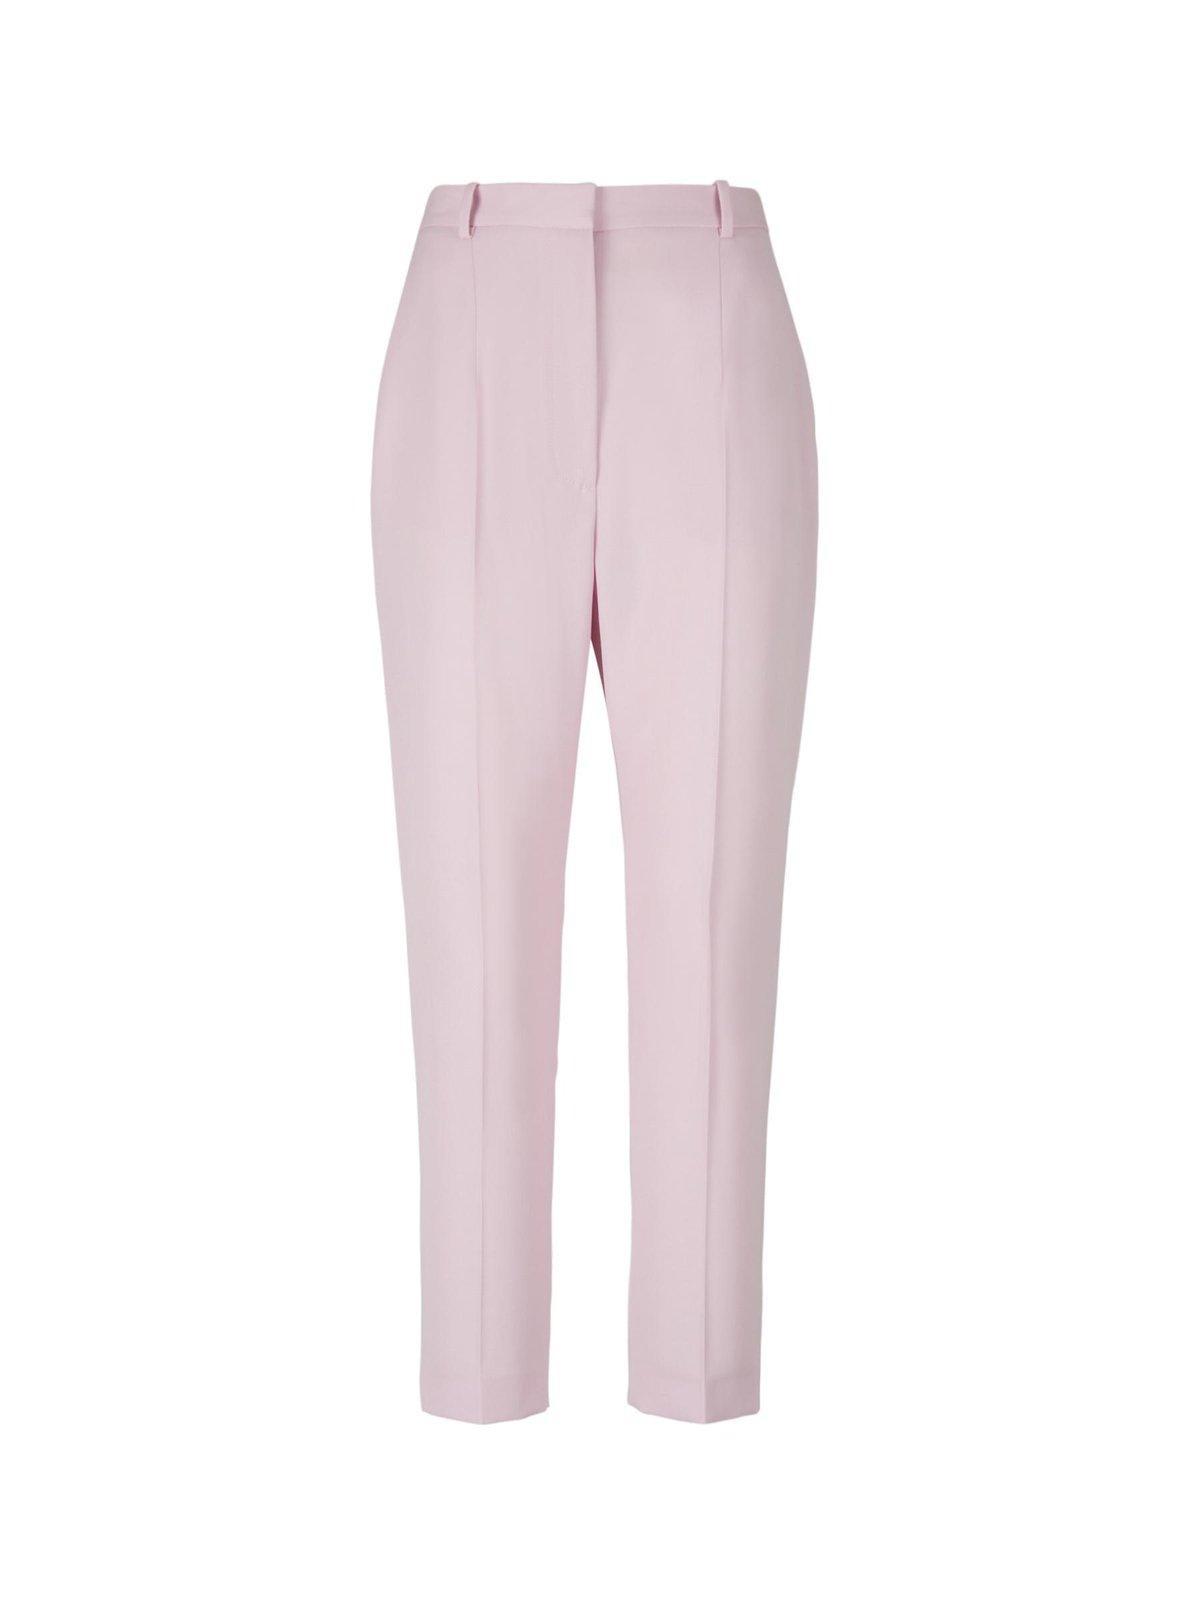 ALEXANDER MCQUEEN CROPPED CIGARETTE TROUSERS